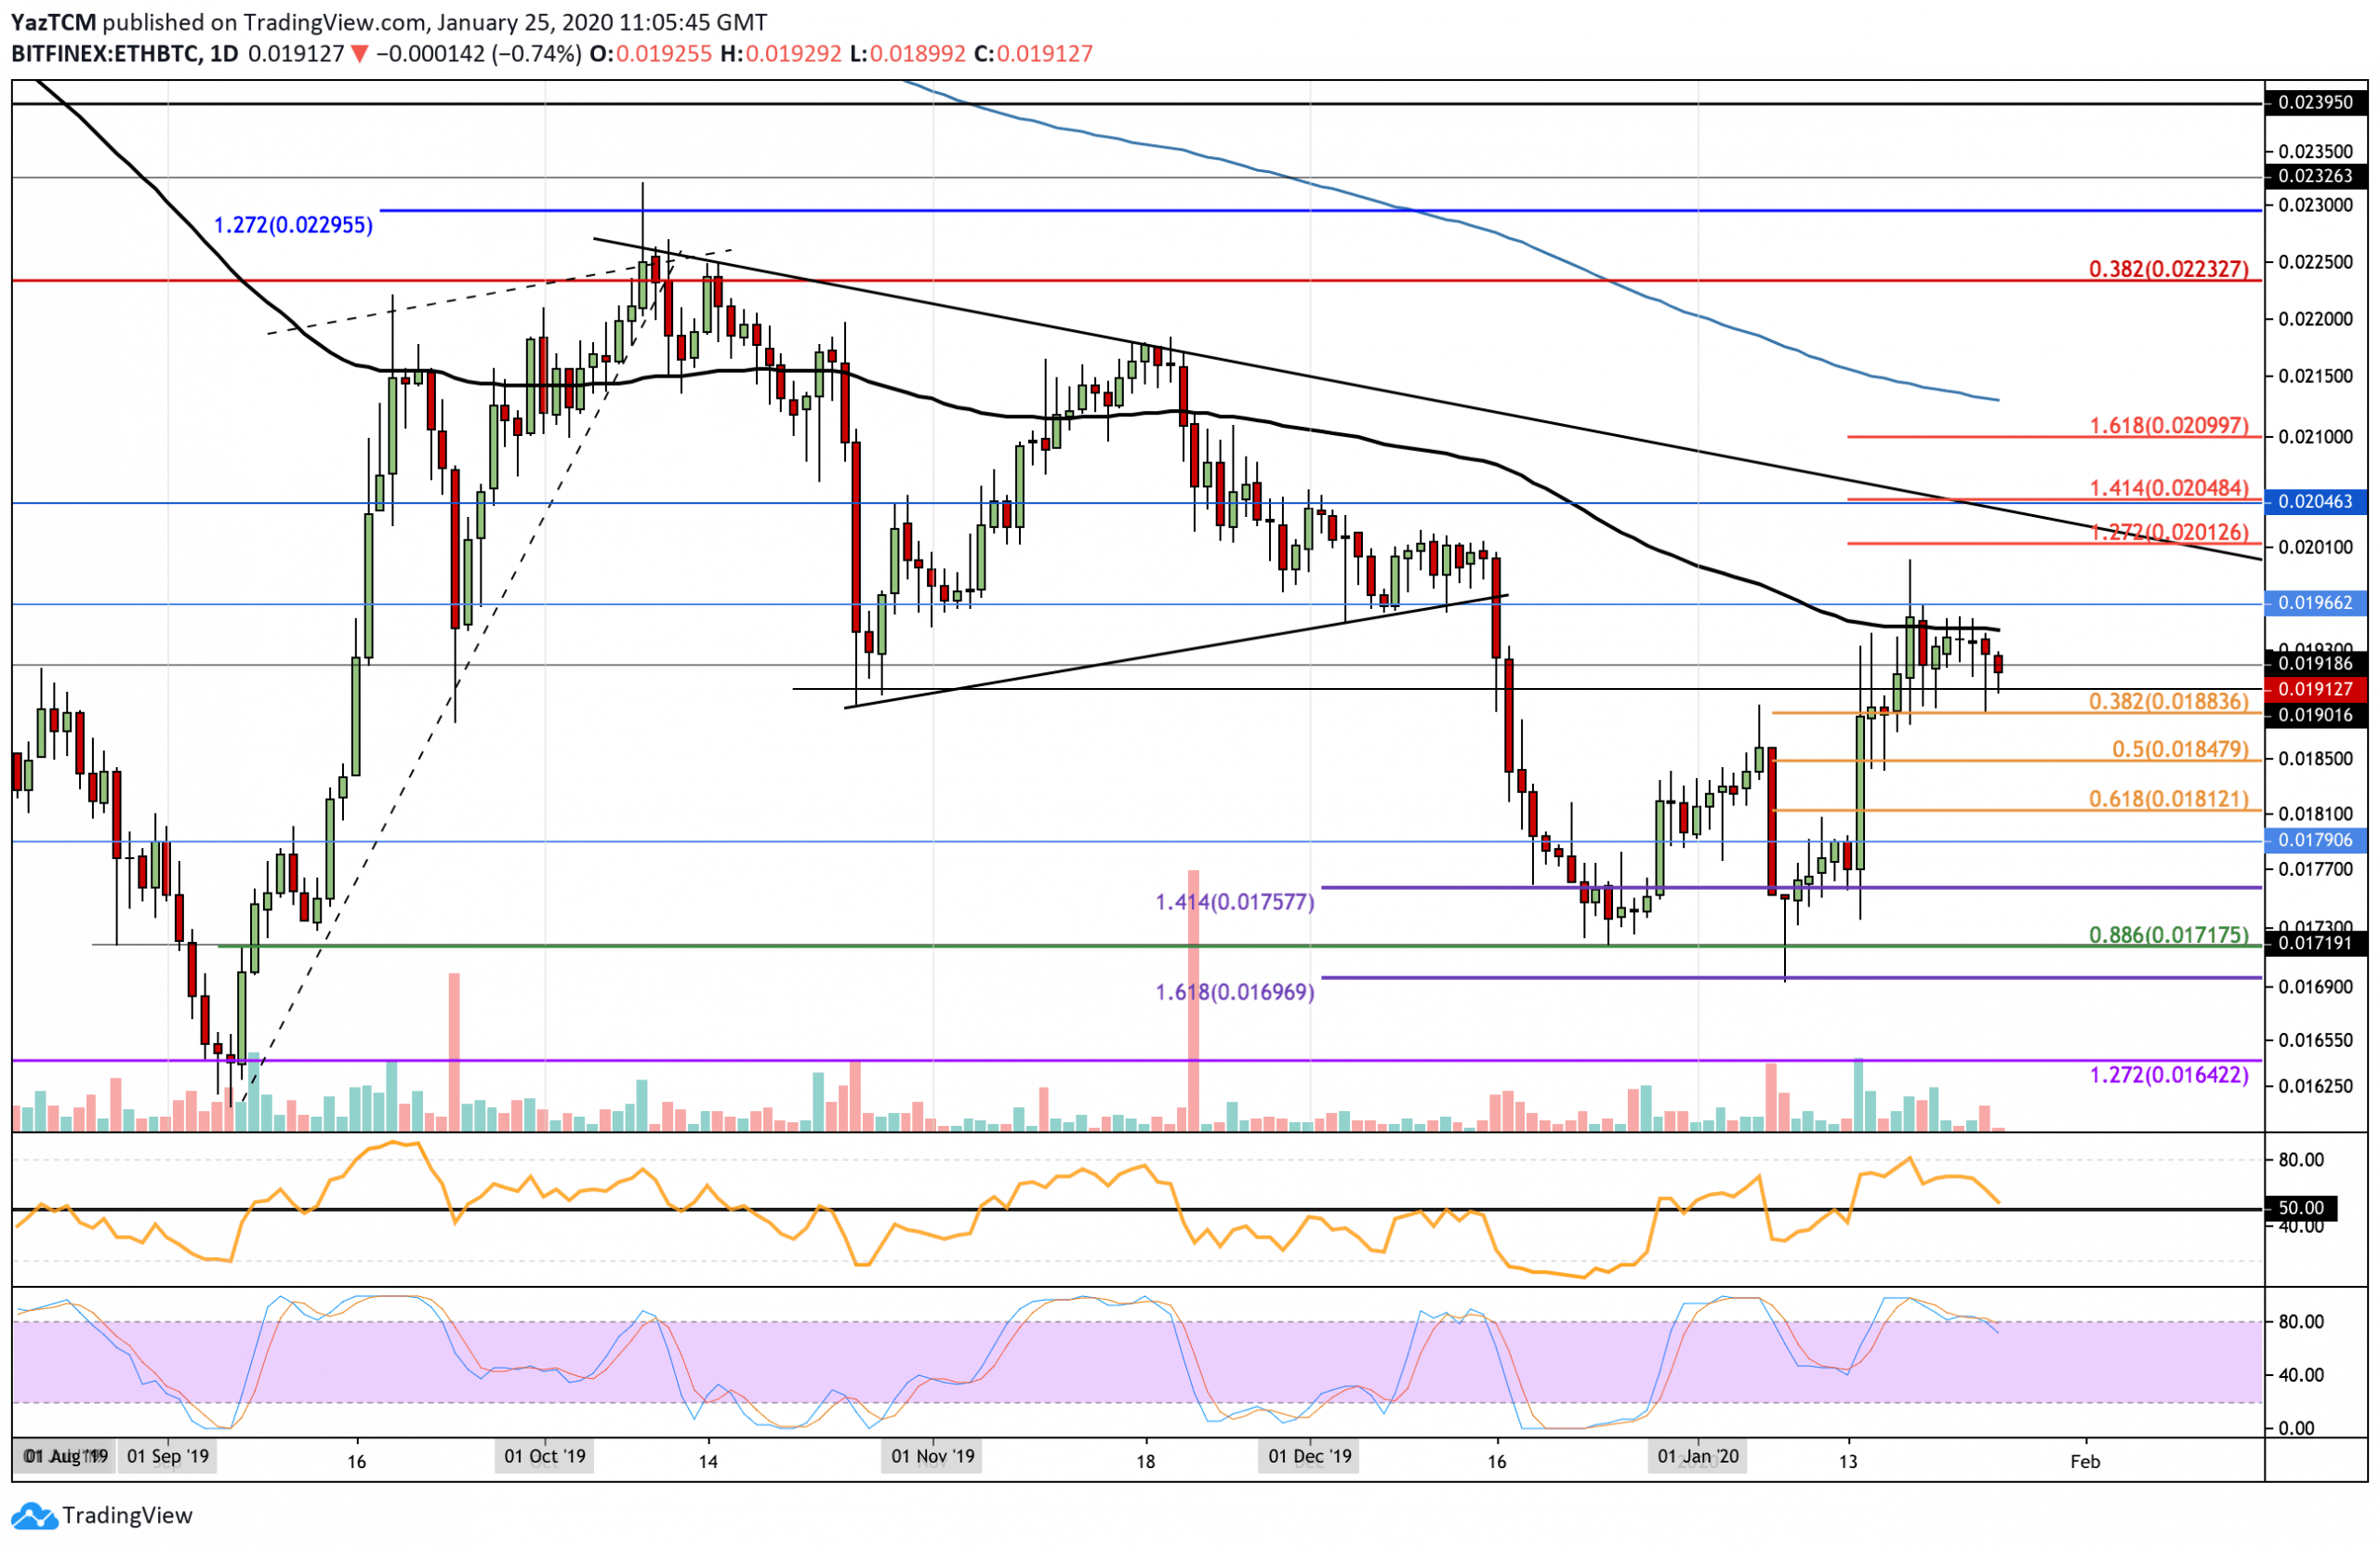 Ethereum Price Analysis: ETH Testing Critical Support Below $160, Will It Hold?